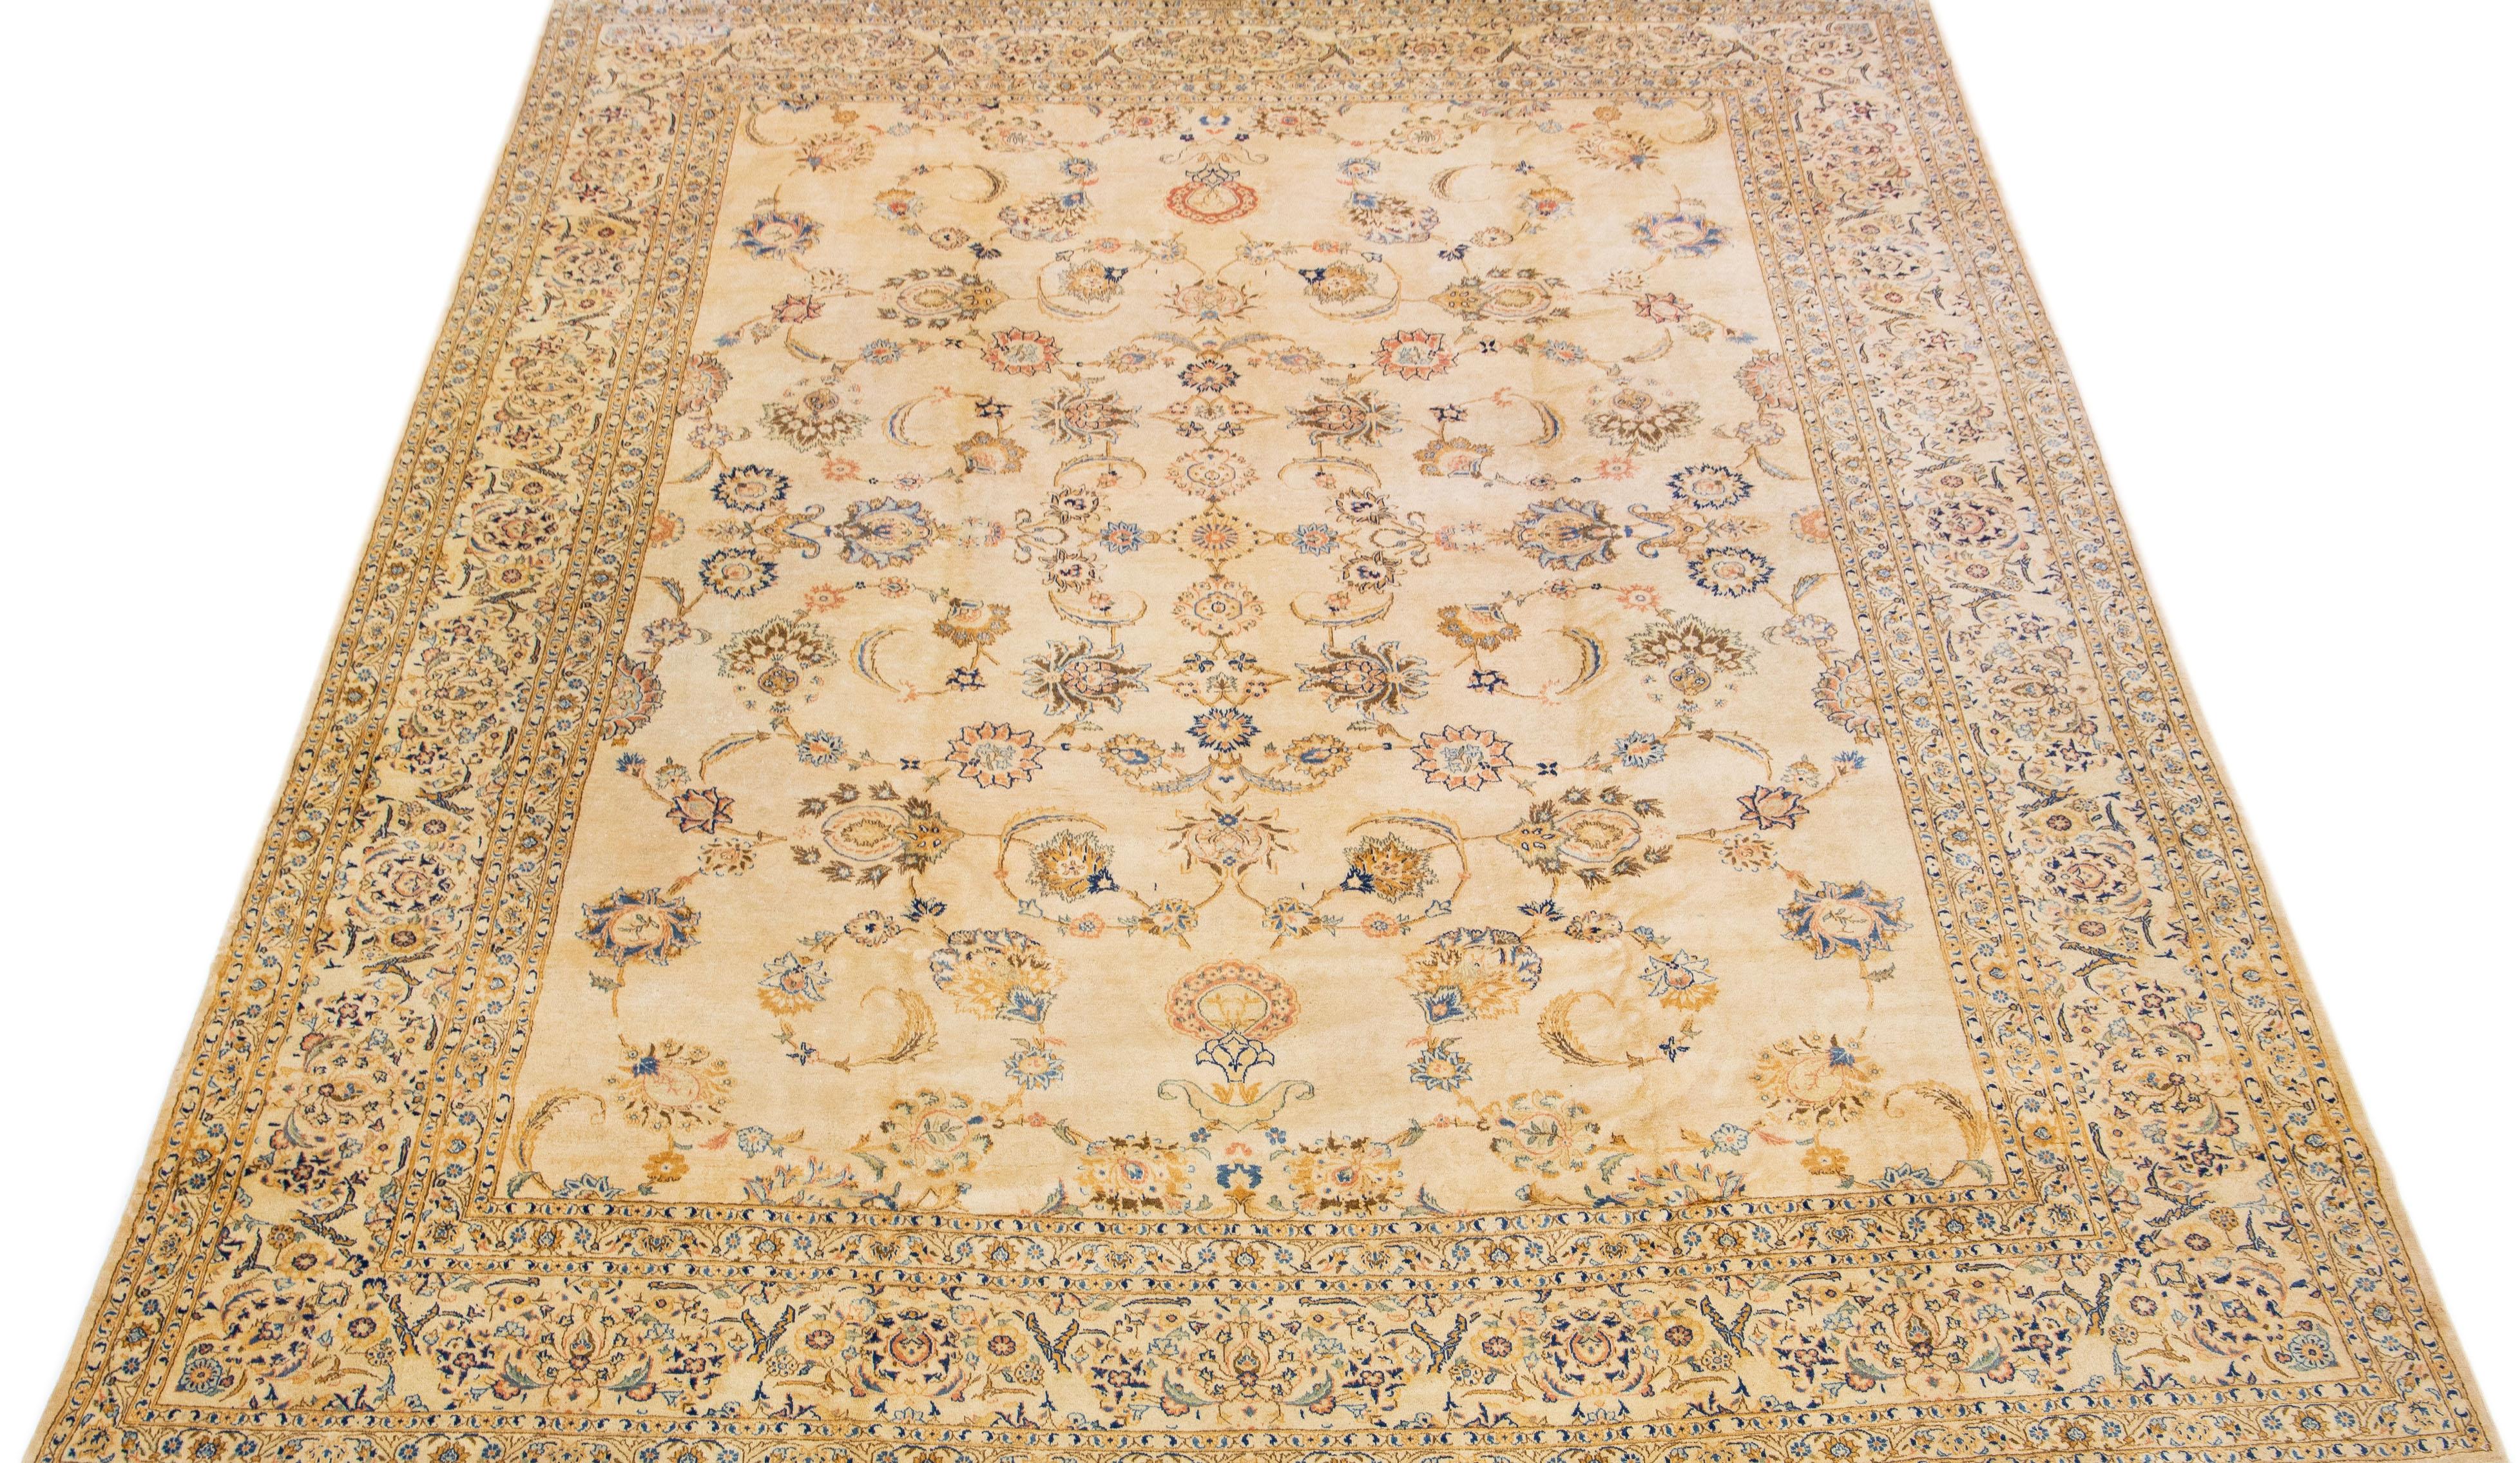 Beautiful Antique Kashan hand-knotted wool rug with a beige color field. This Persian rug has blue, golden, and brown accents in a gorgeous classic floral design. 

This rug measures 10'6